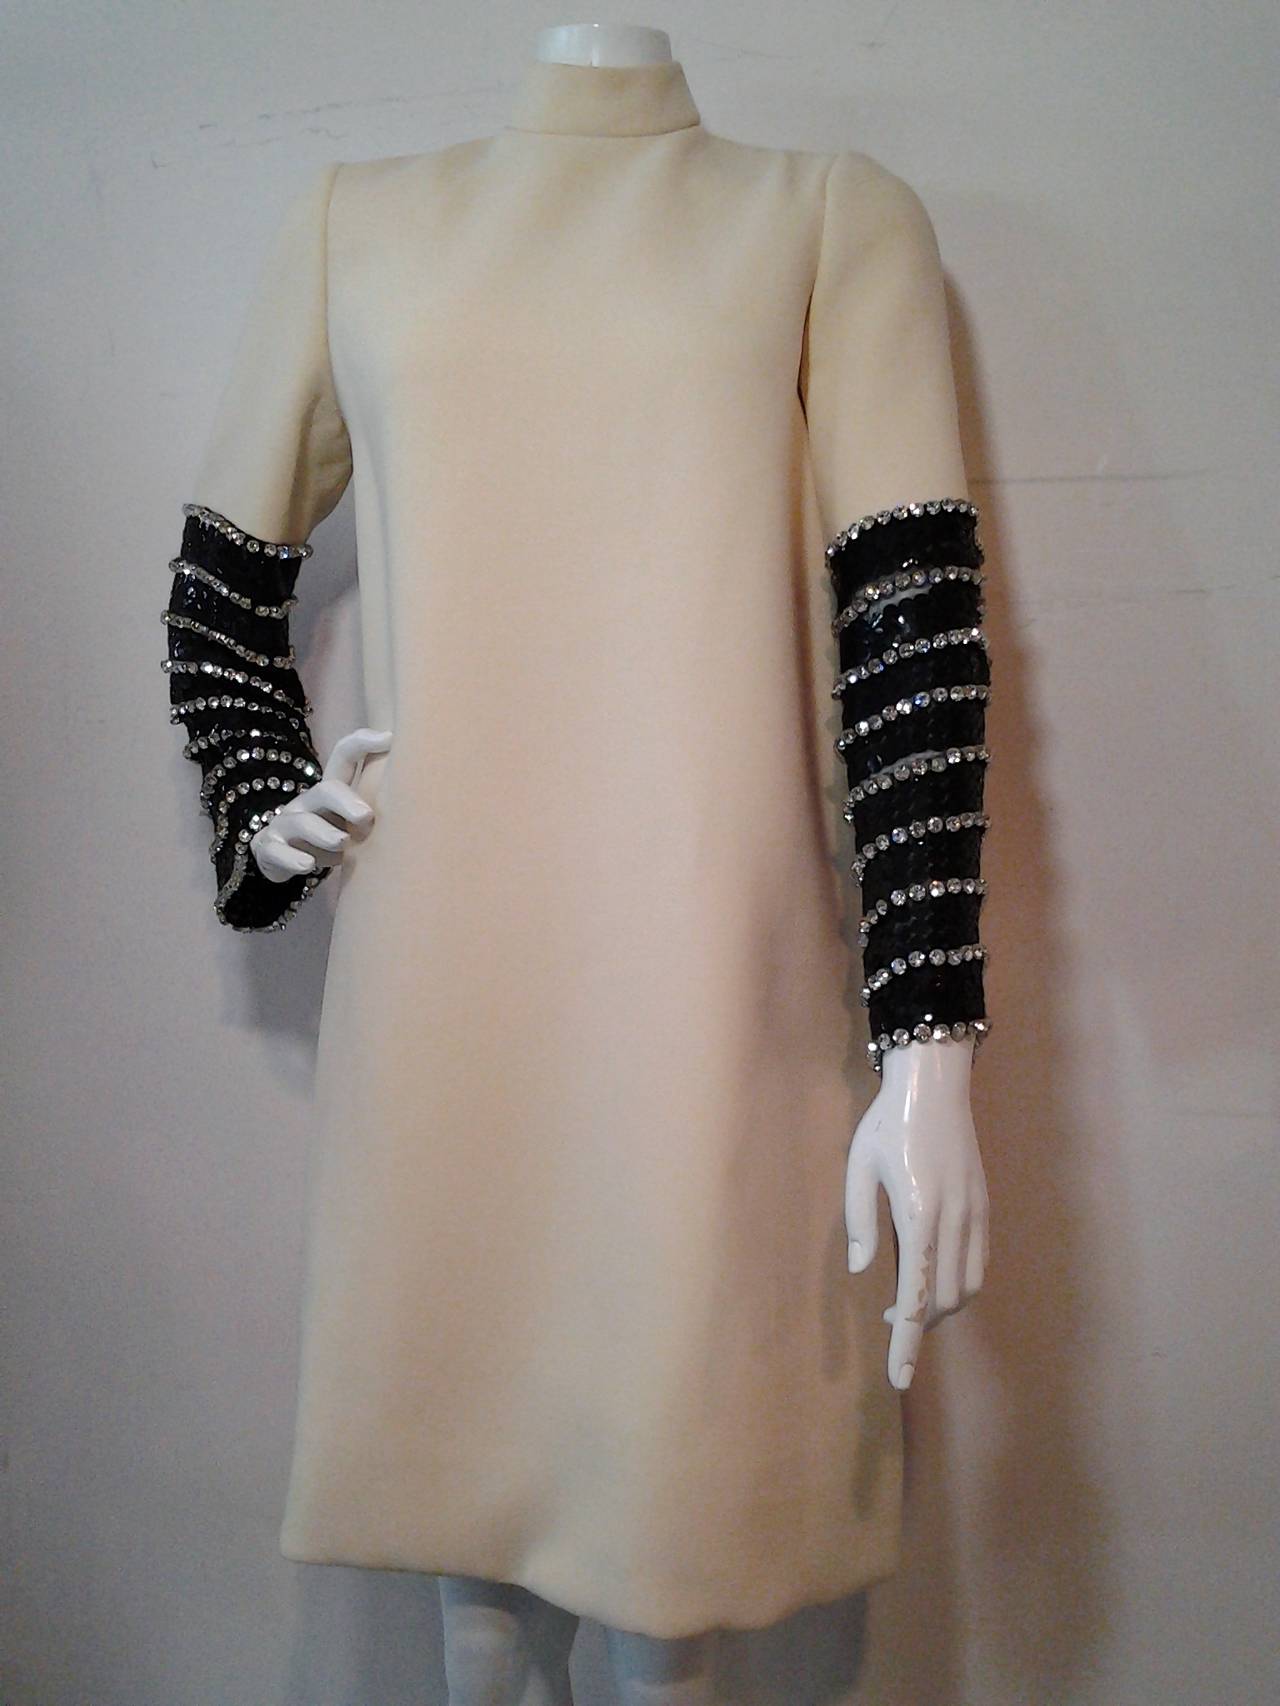 An iconic and spectacular 1960s Norman Norell lightweight ivory wool crepe trapeze shaped cocktail dress with richly embellished sleeve treatment!  Black  paillettes with large prong set rhinestones from mid forearm to cuff!  Fully lined.